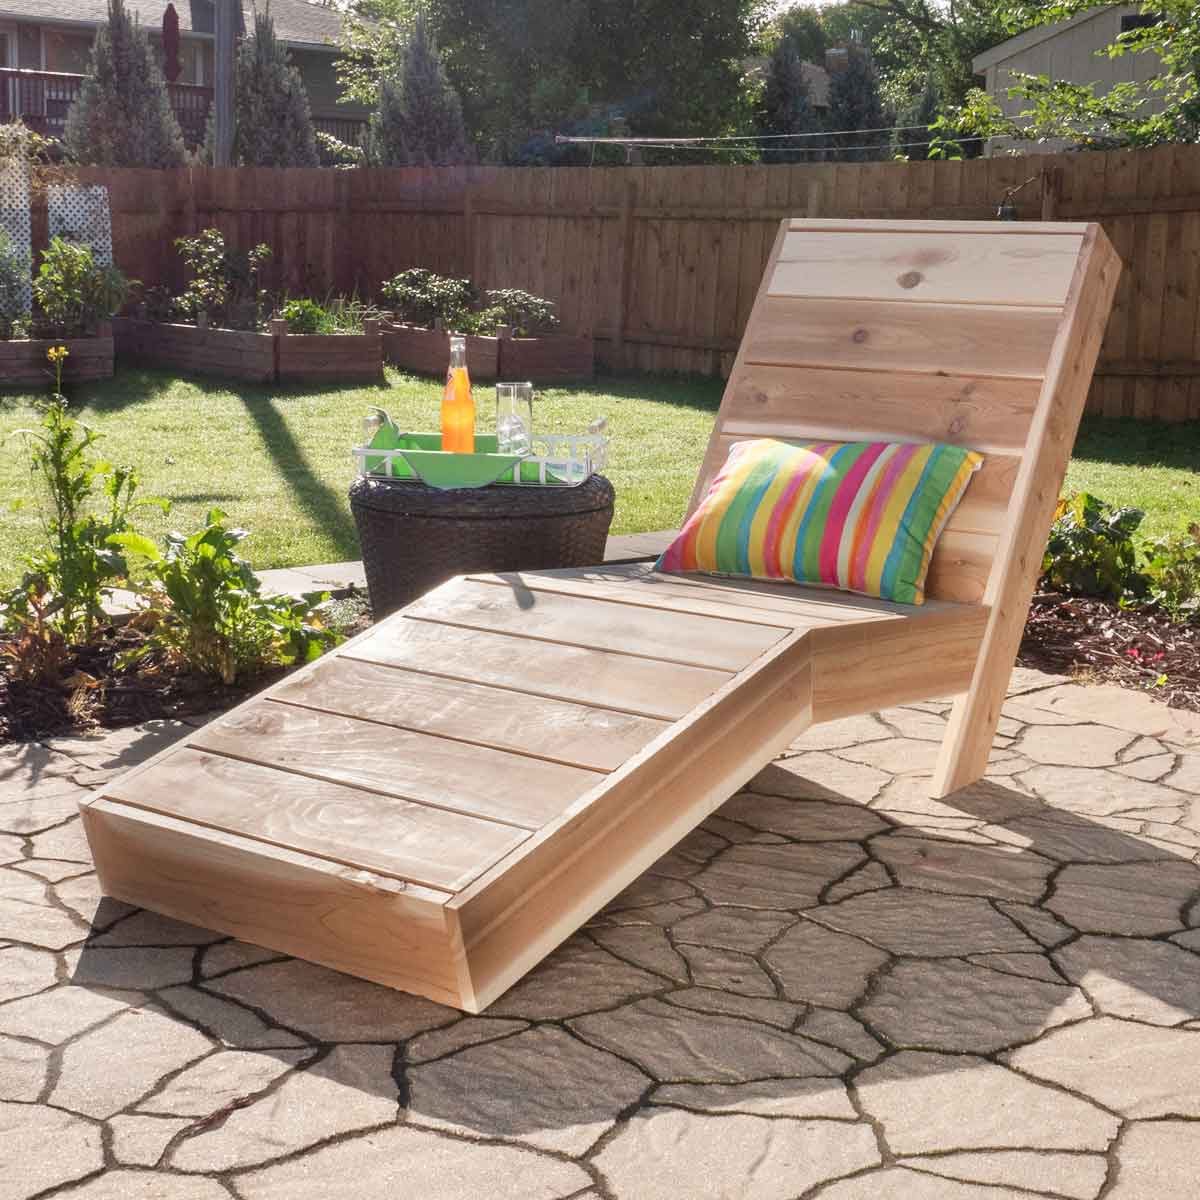 How to Build Outdoor Chaise Lounge (DIY) | Family Handyman